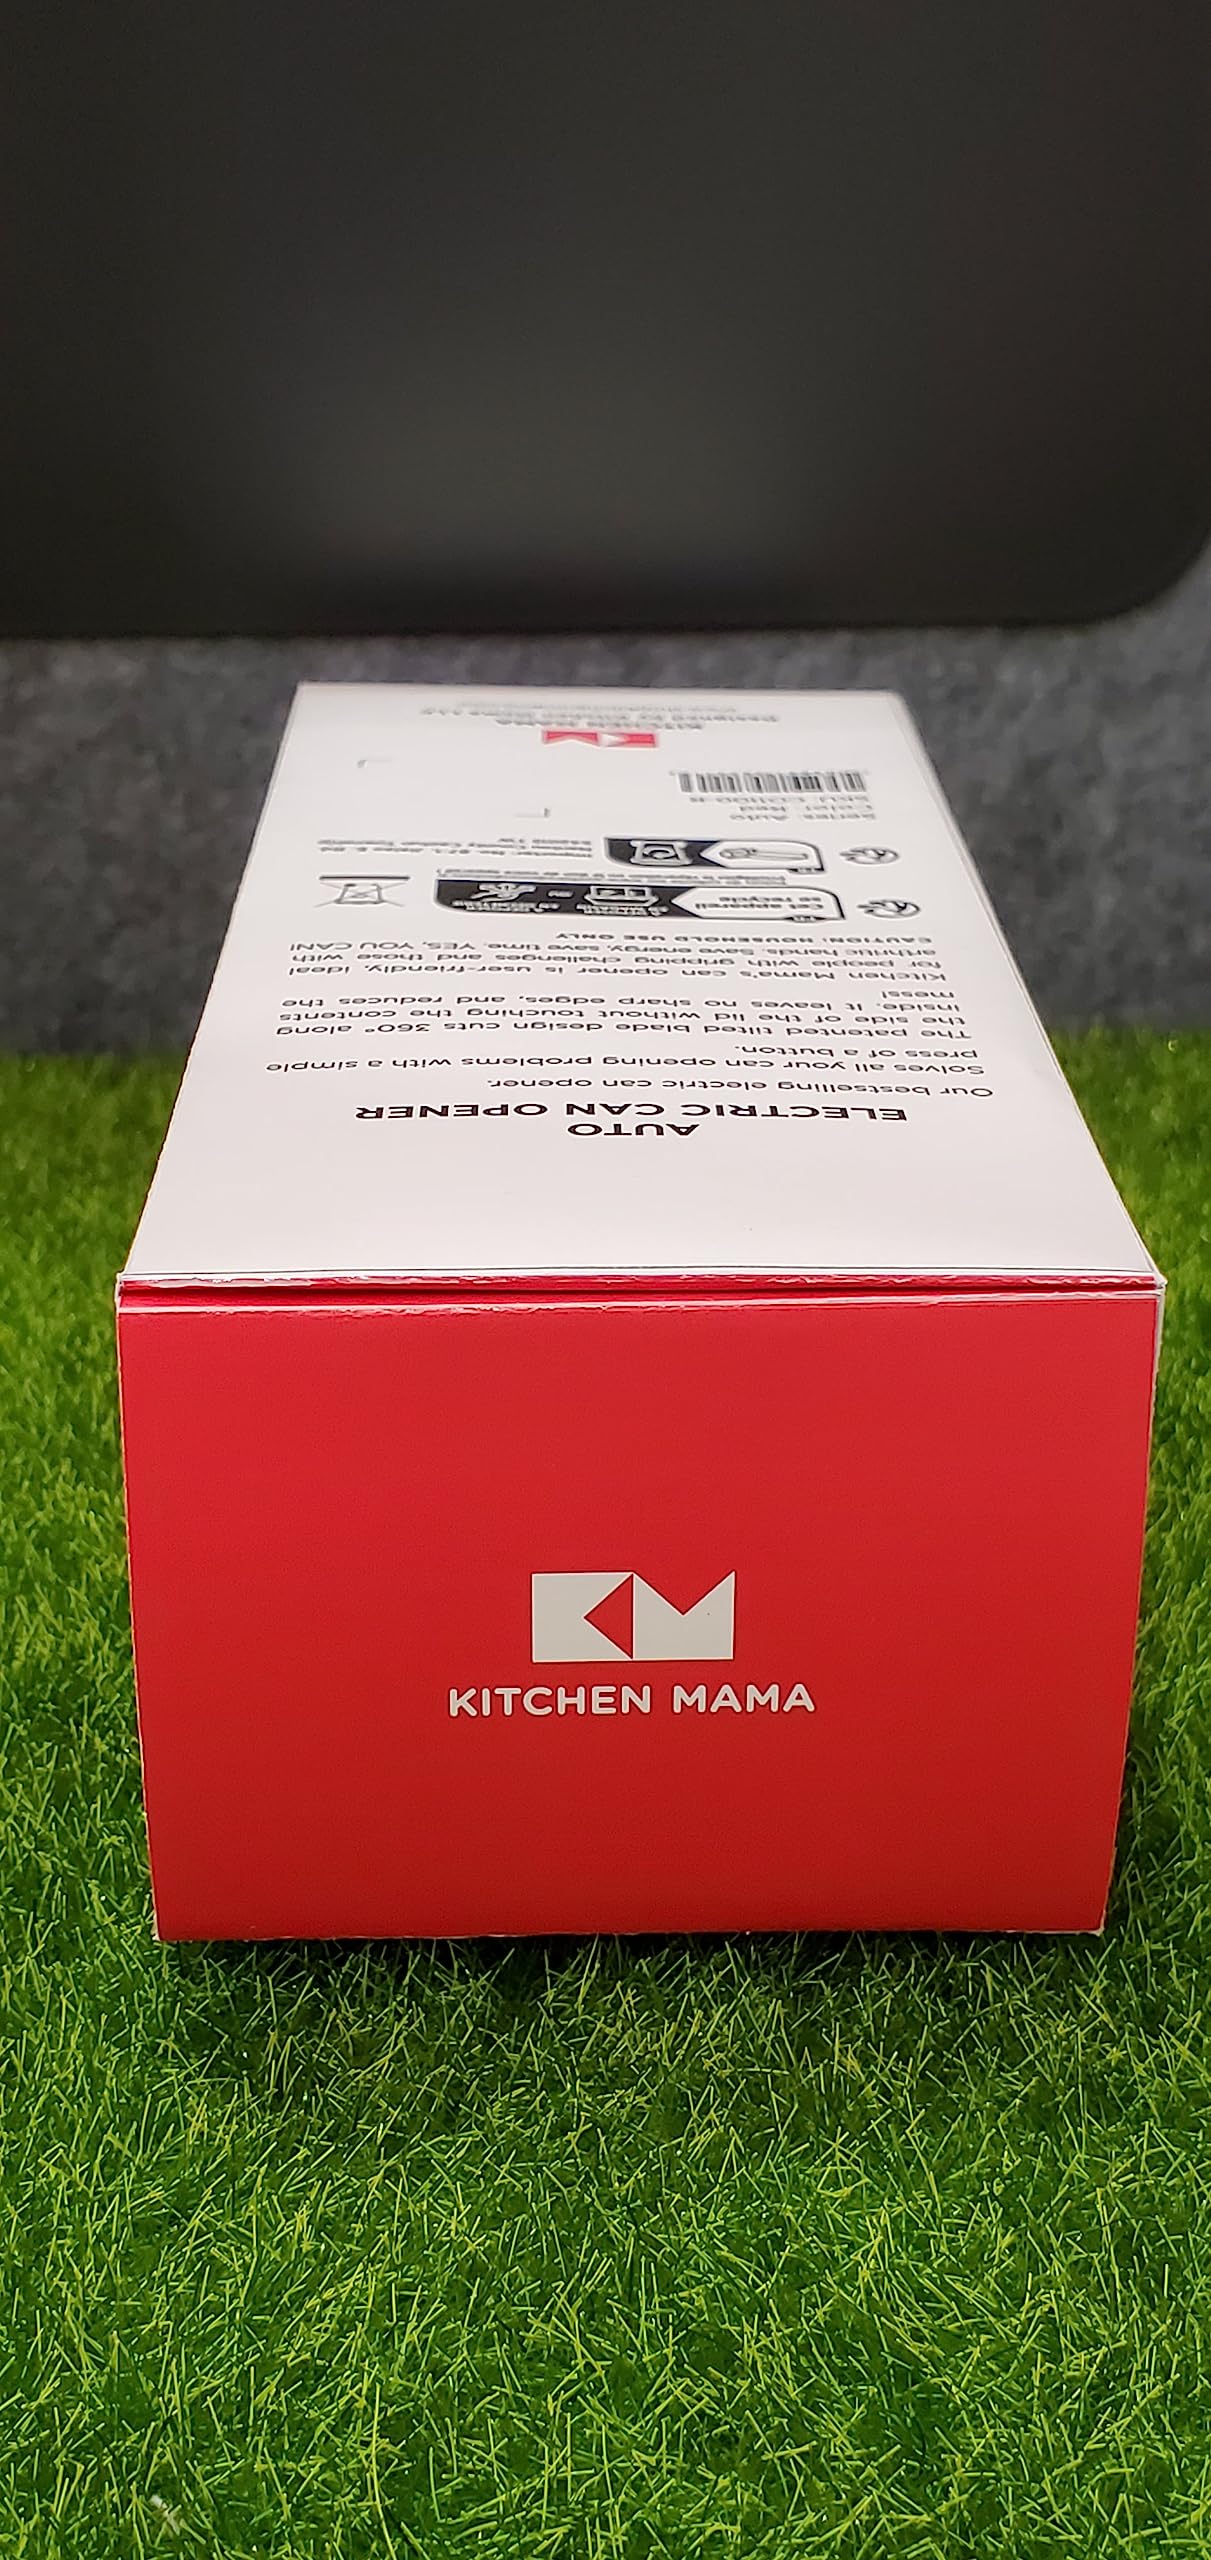 Kitchen Mama Auto Electric Can Opener: Open Your Cans with A Simple Push of Button - Automatic, Hands Free, Smooth Edge, Food-Safe, Battery Operated, YES YOU CAN (Red)